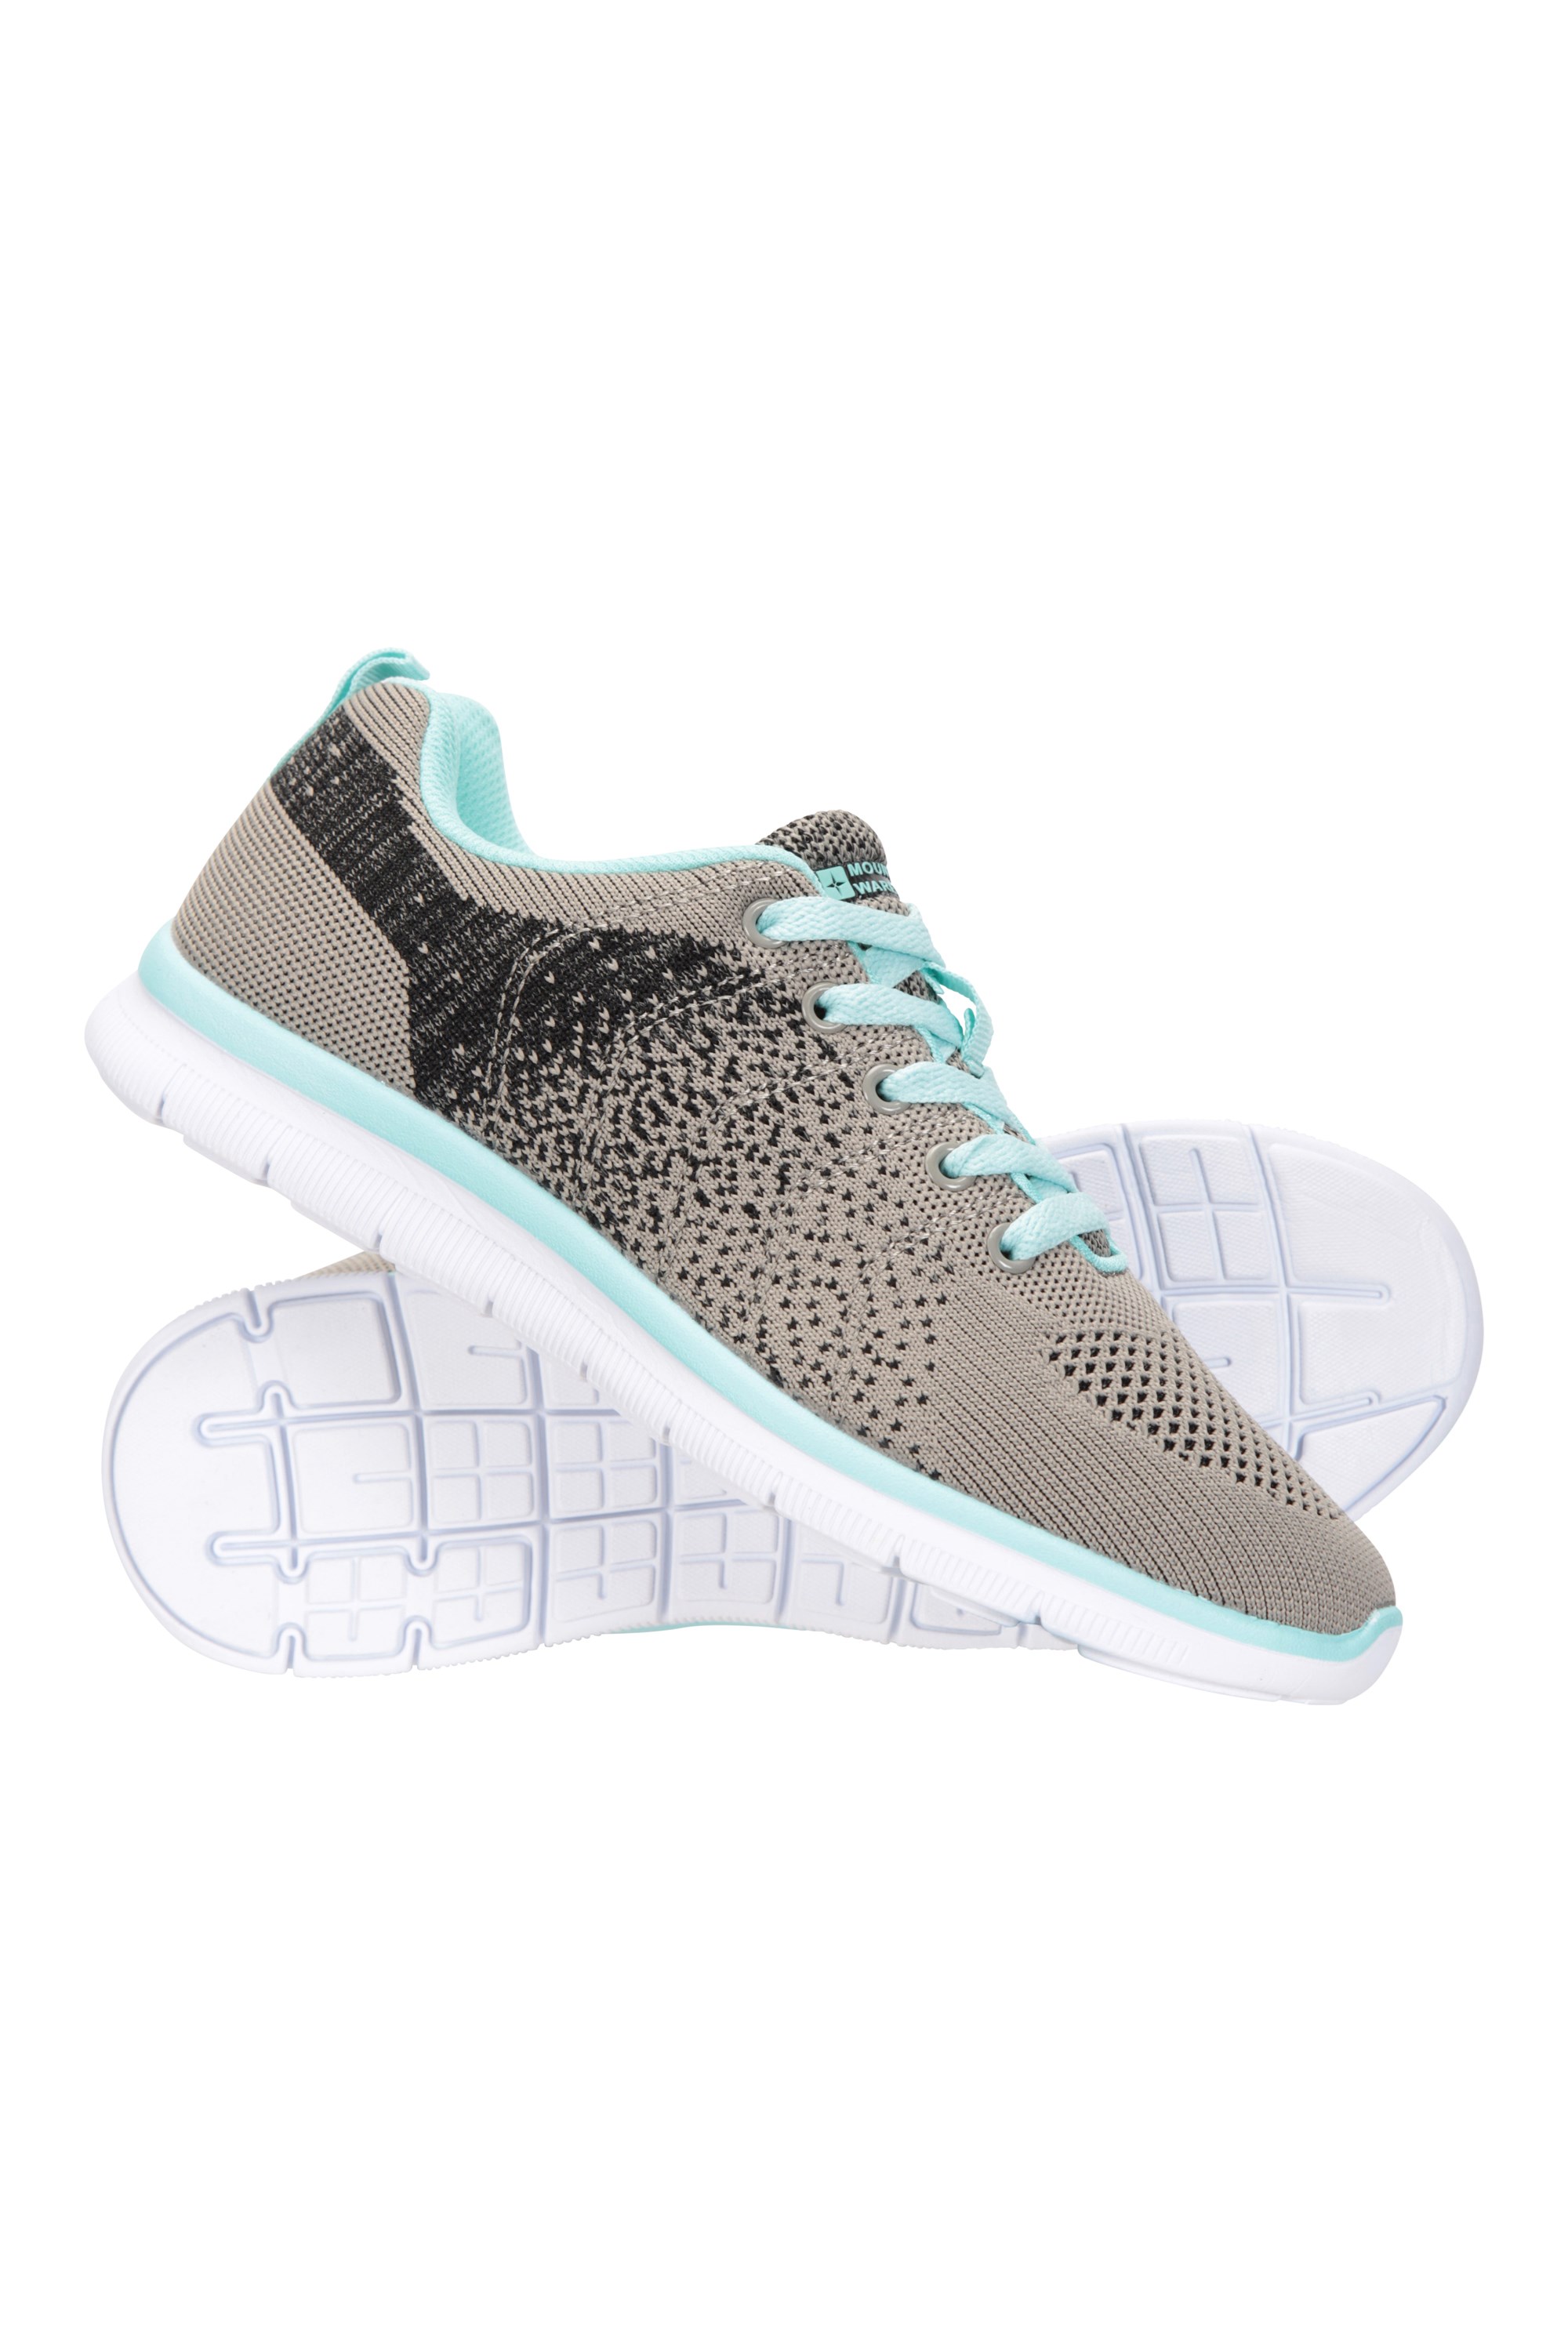 Chaussures Zoom Active femme - Gris